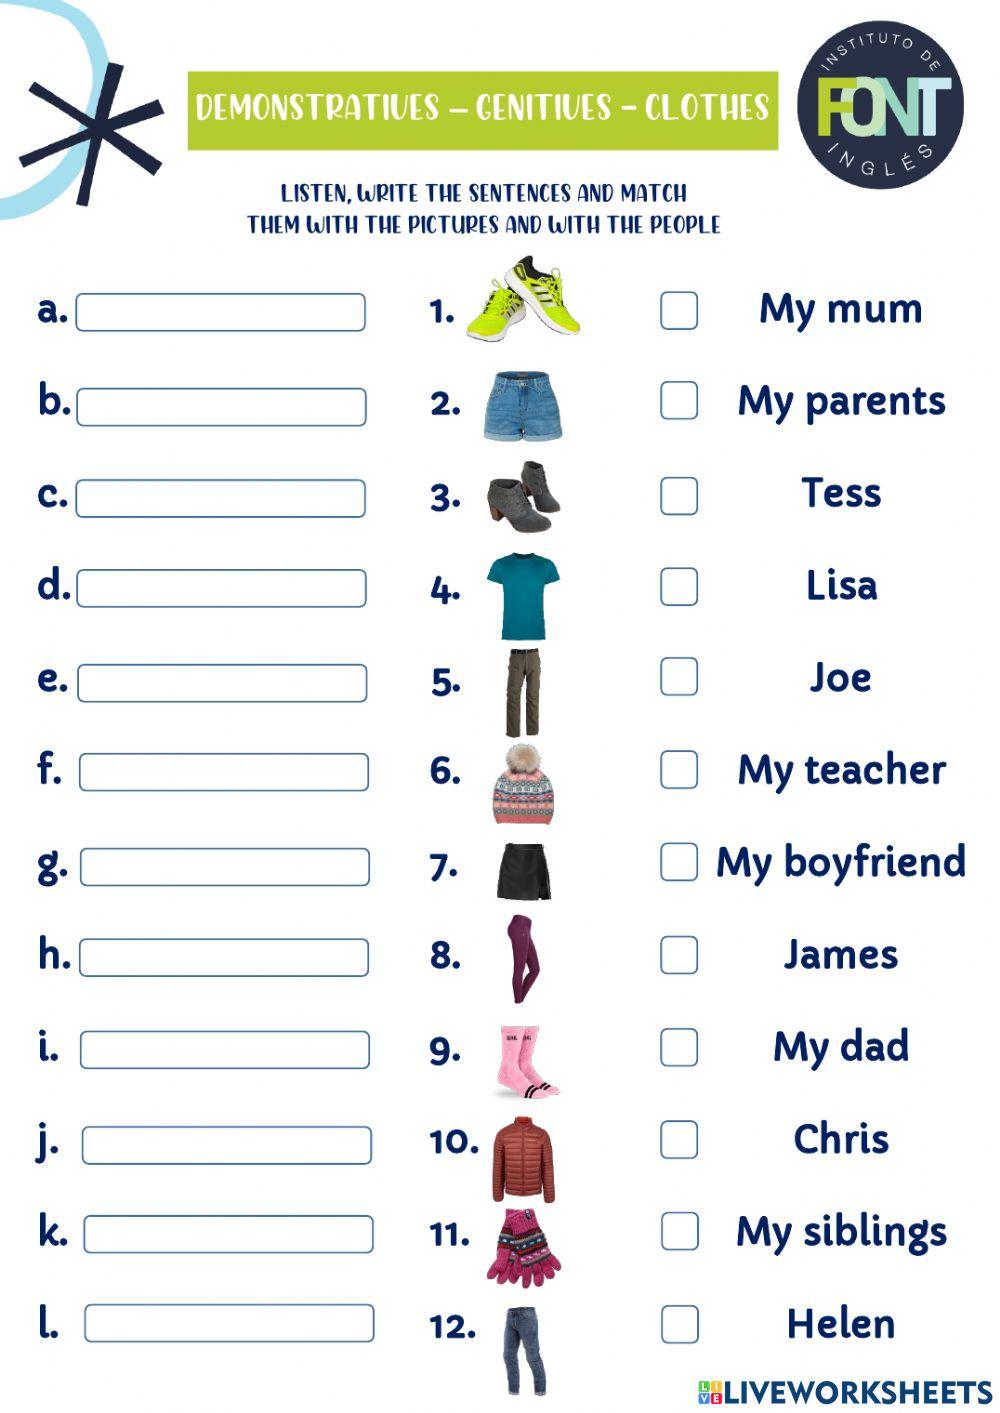 Demonstratives, Genitive, Clothes